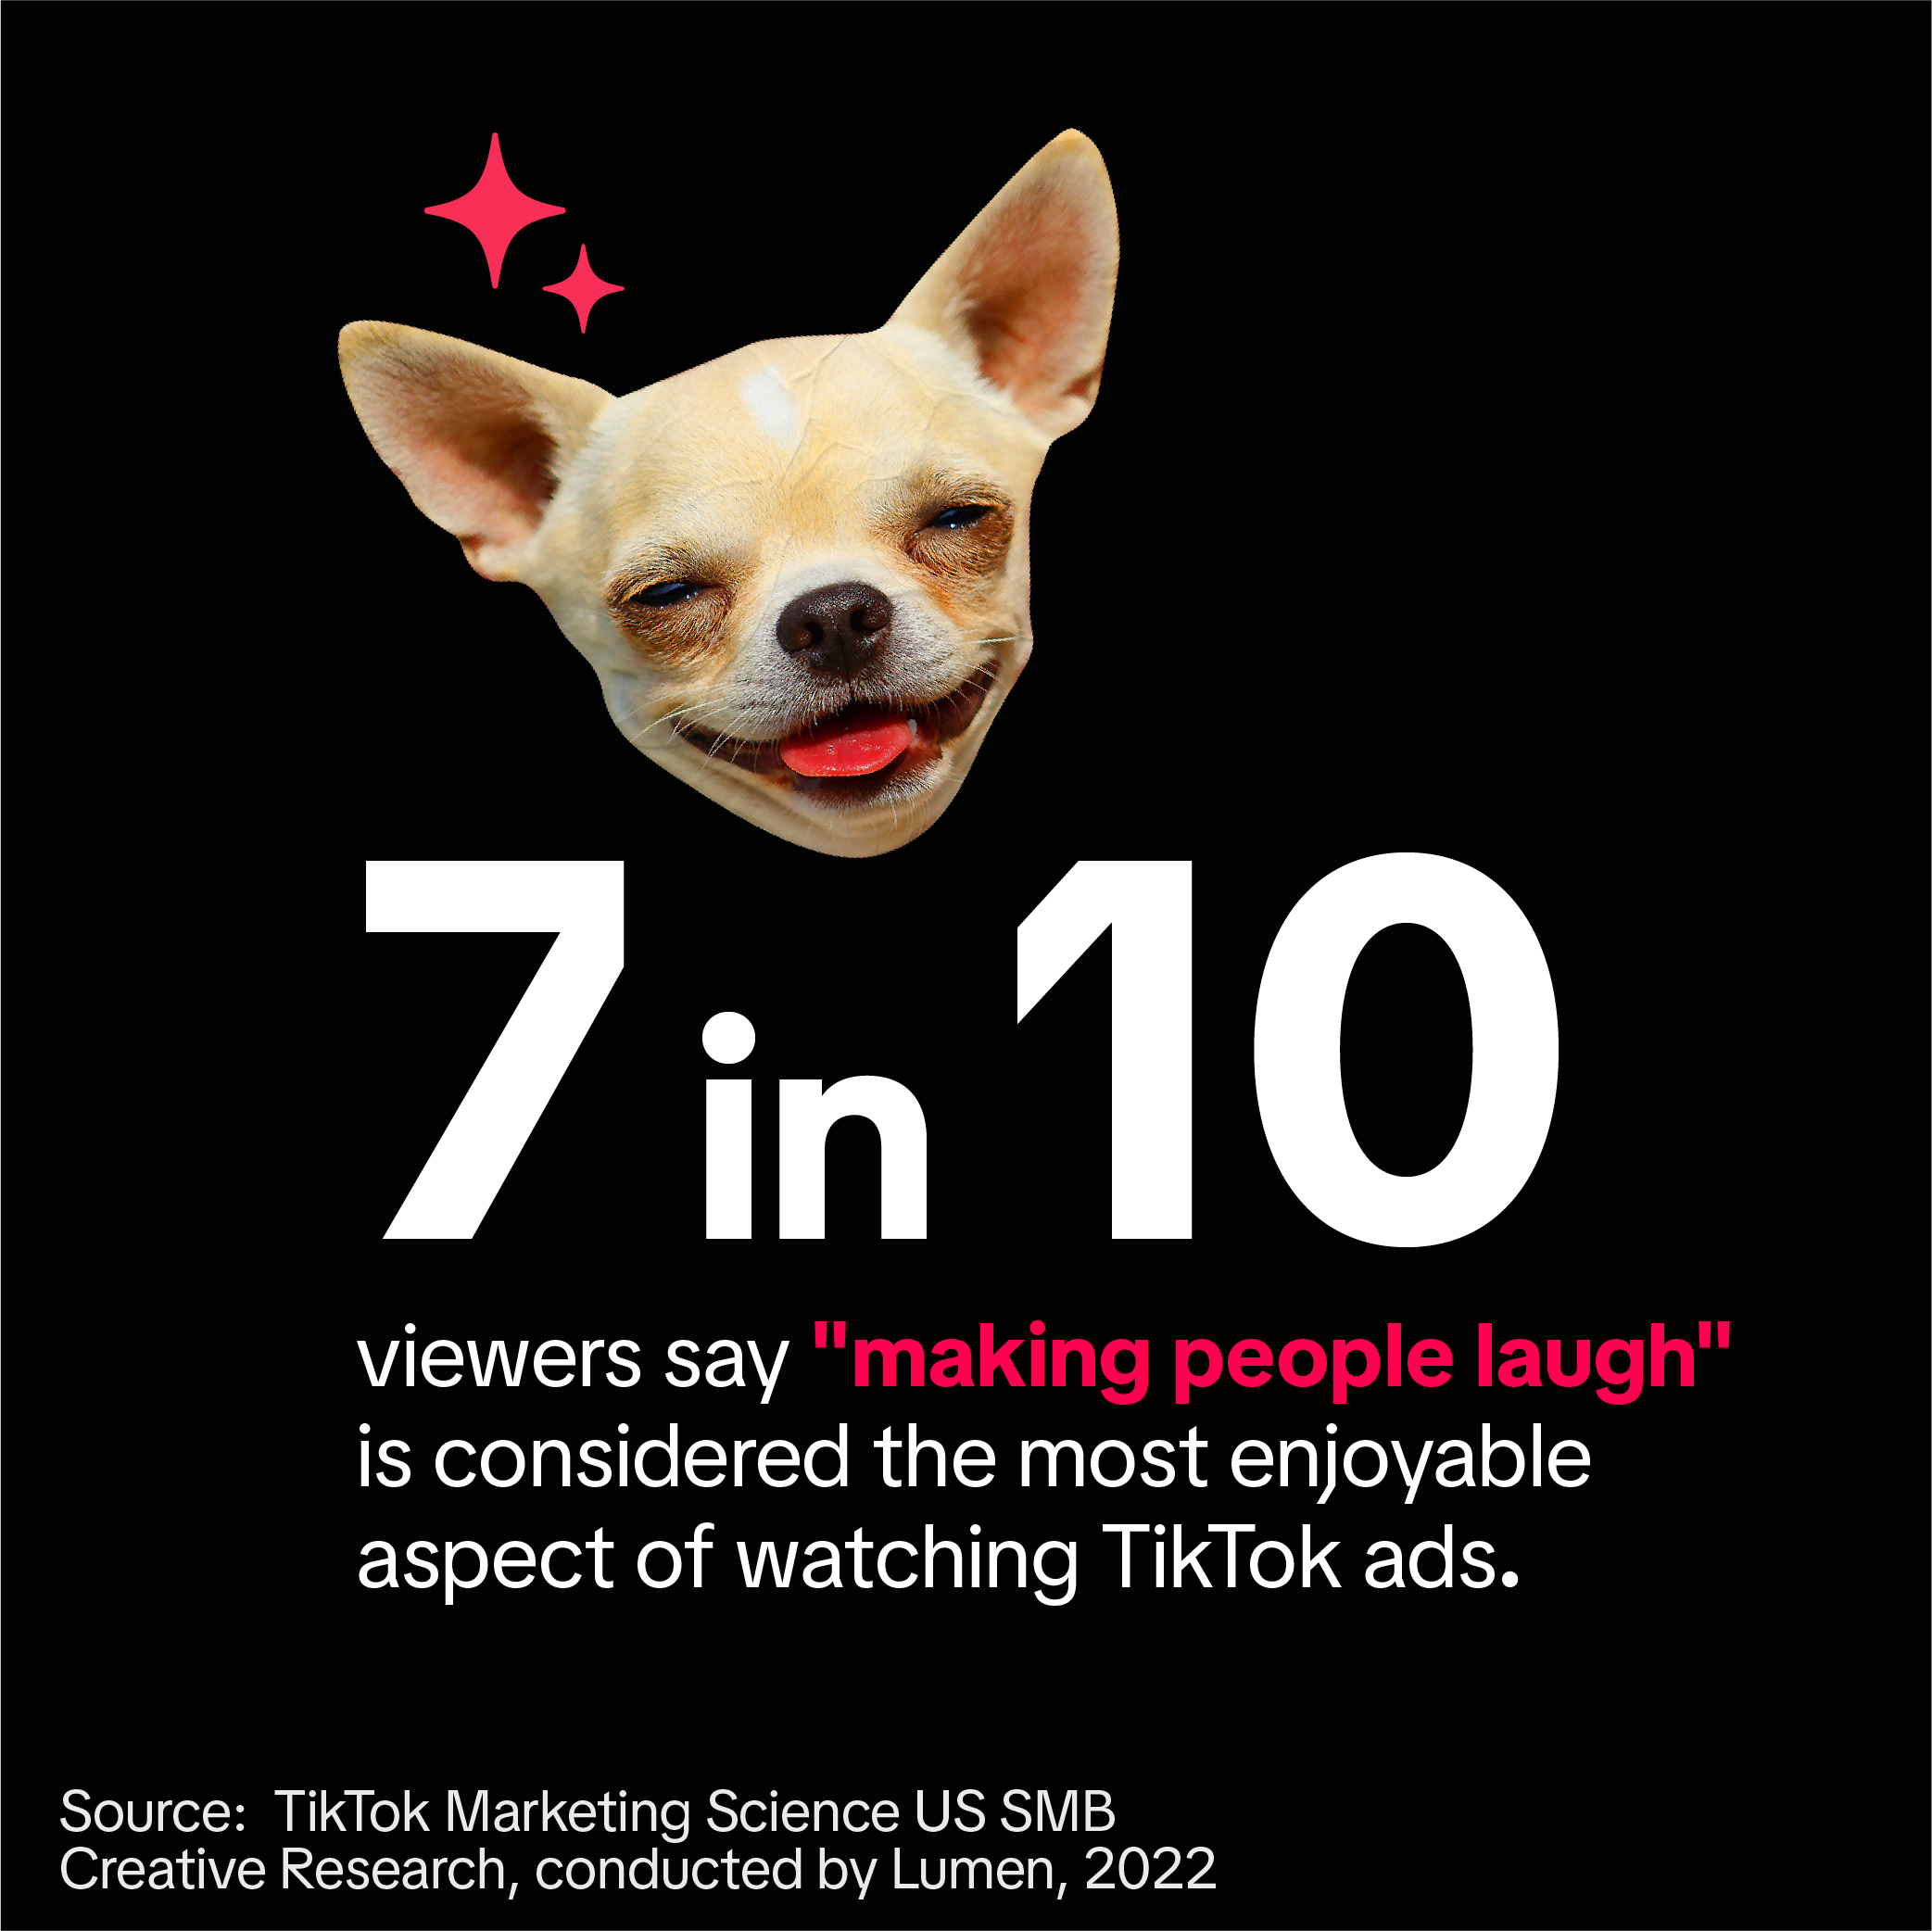 7 in 10 viewers say "making people laugh" is considered the most enjoyable aspect of watching TikTok ads